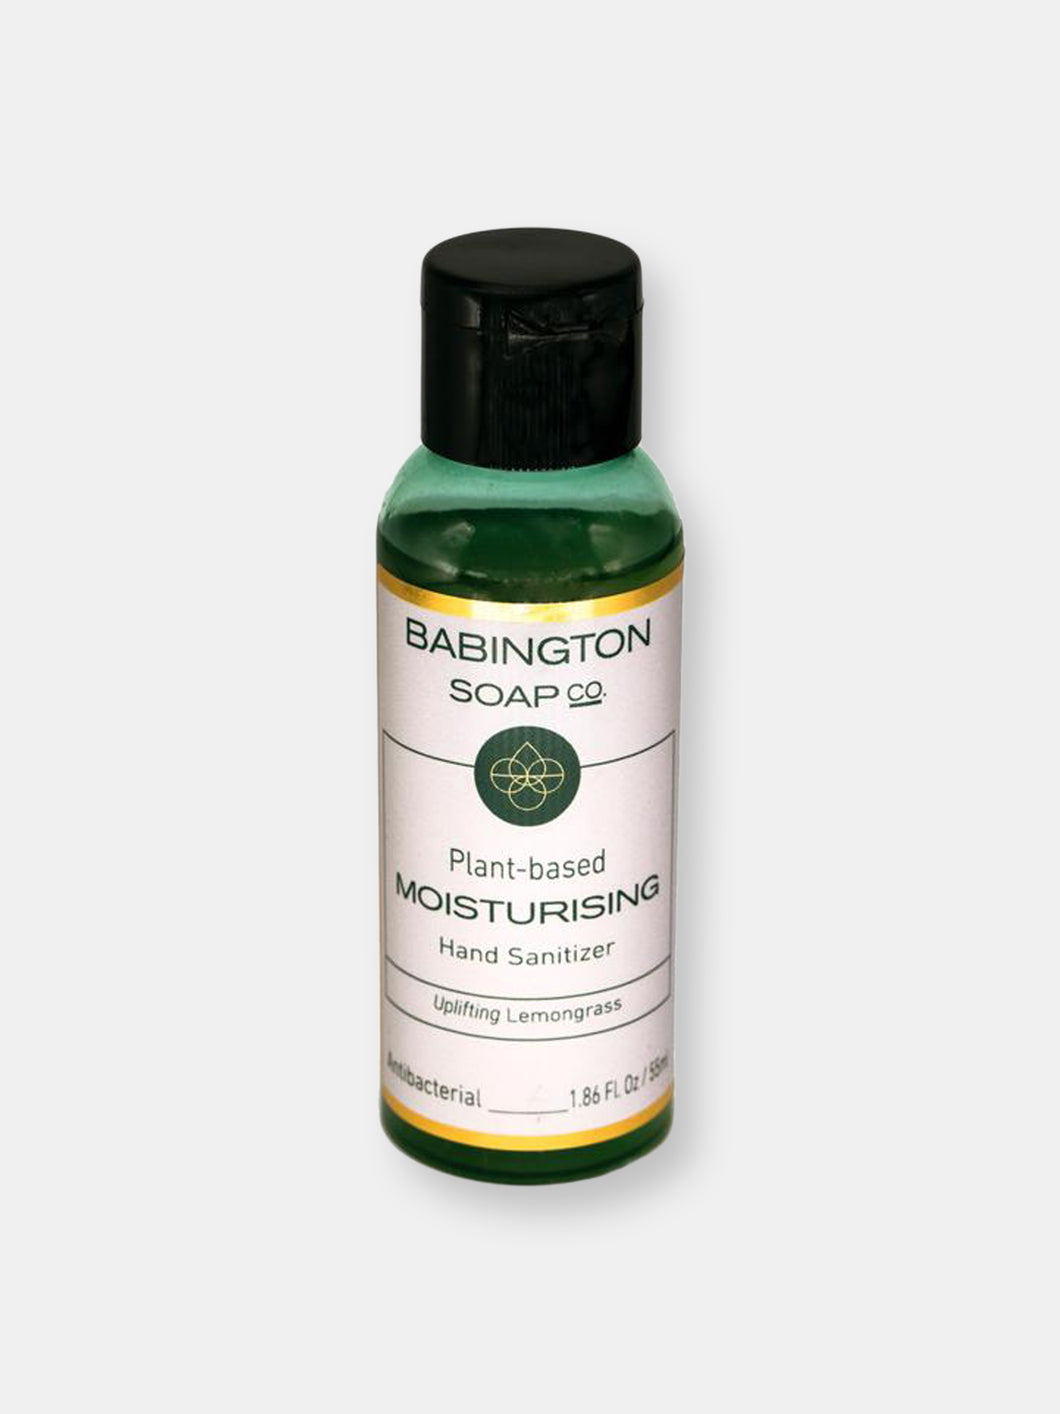 Travel Size 2-In-1 Plant-Based Moisturizer Gel With An Antibacterial - Uplifting Lemongrass